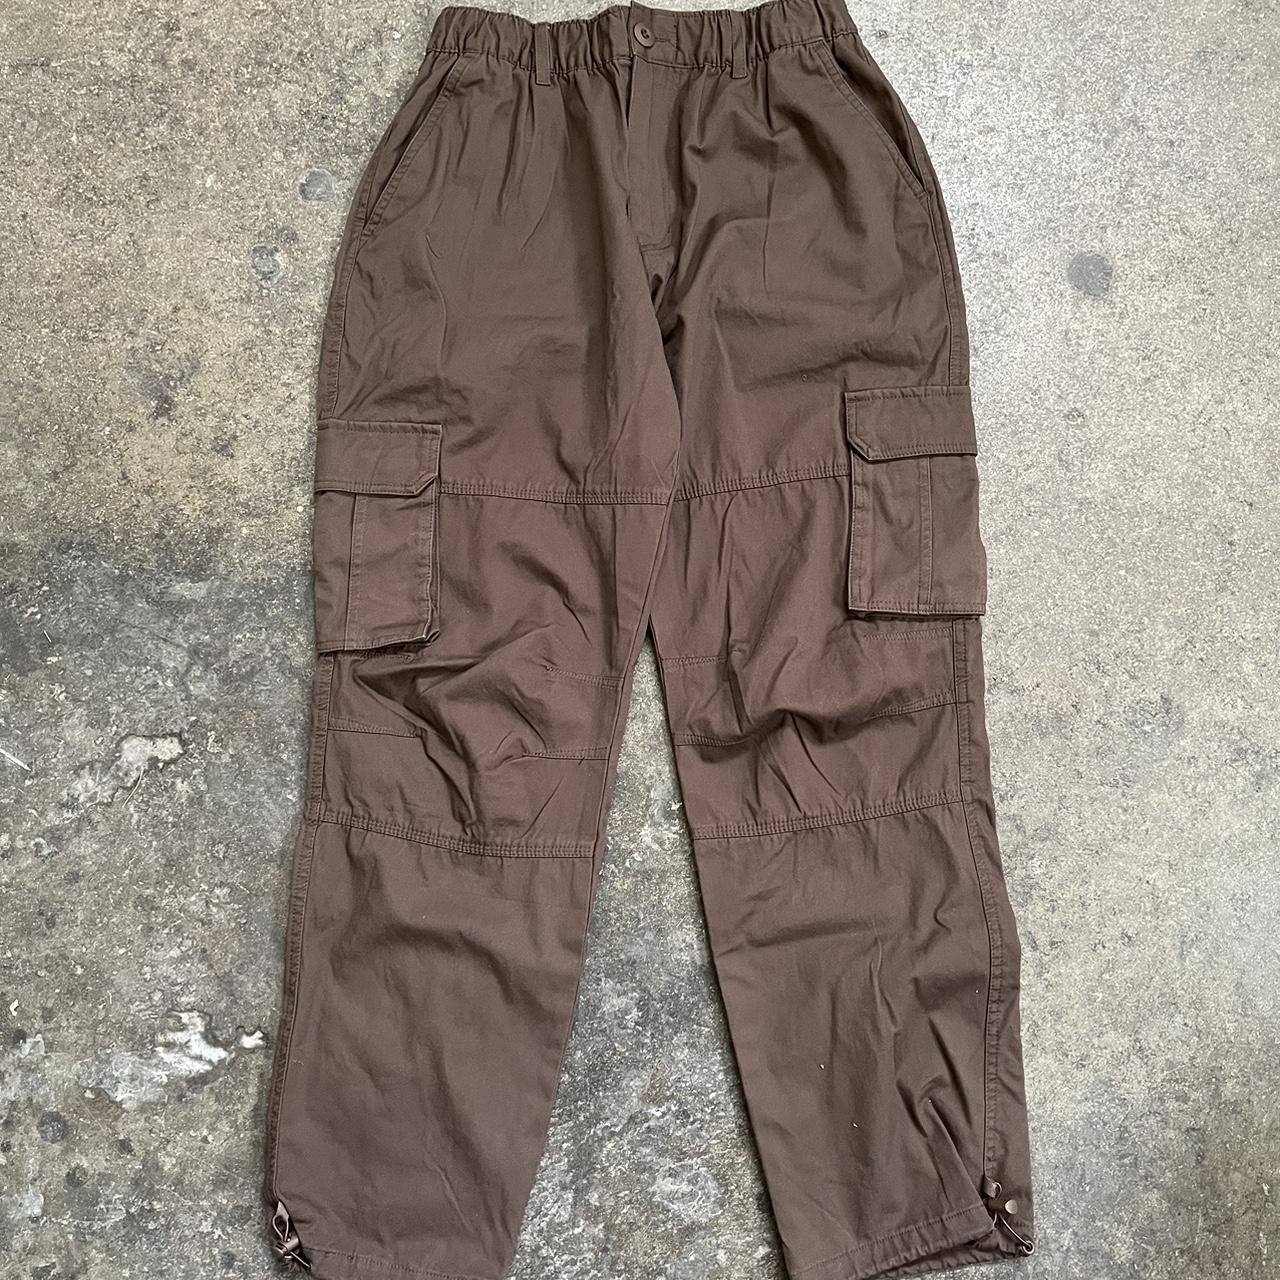 Vintage Cargo Pants Earth Brown Multiple sizes and... - Depop